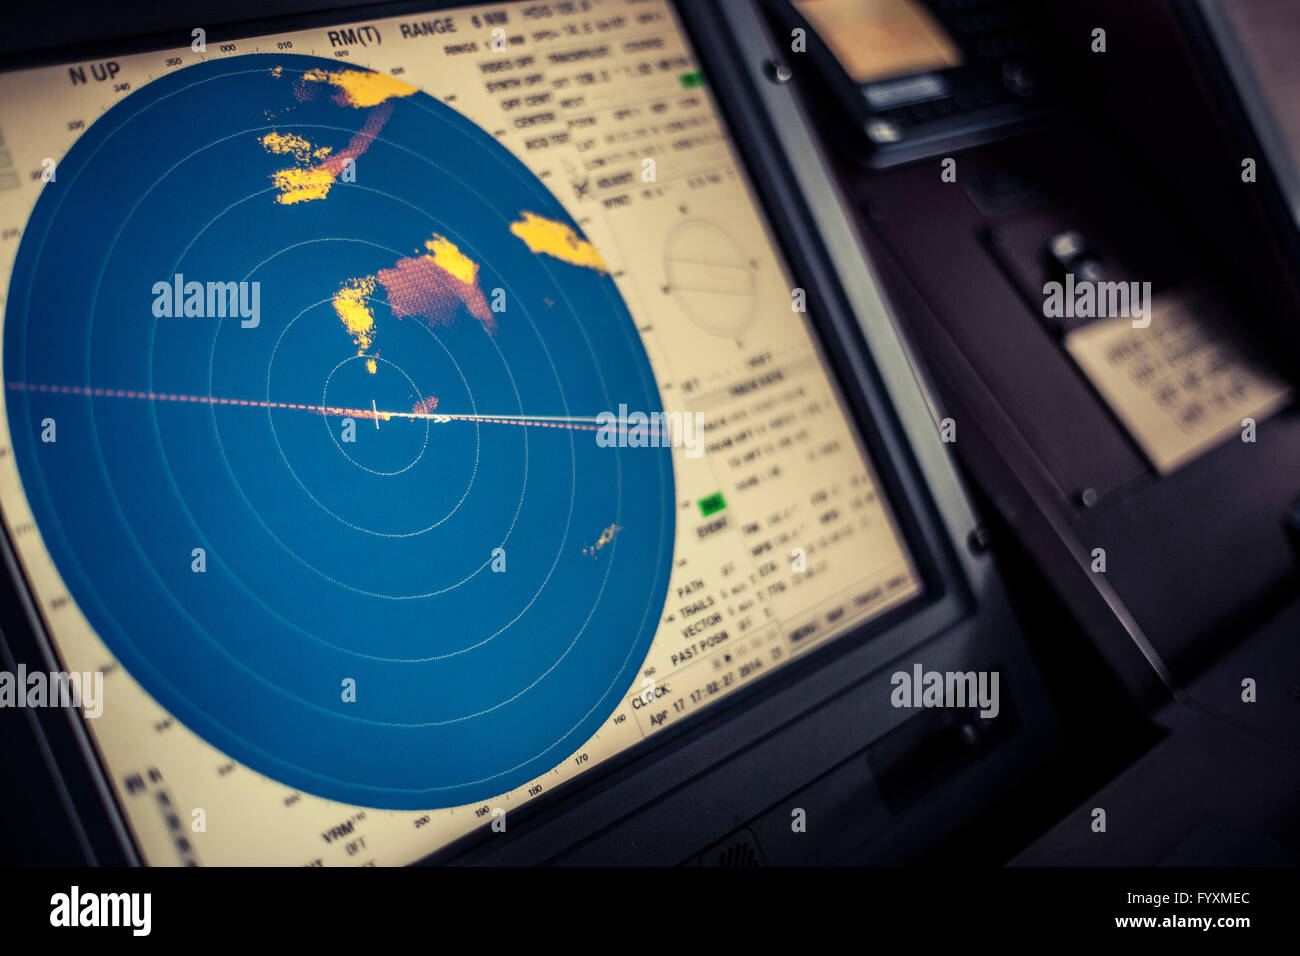 Radar display on an electronic map on the navigation deck of a container ship at sea. Stock Photo